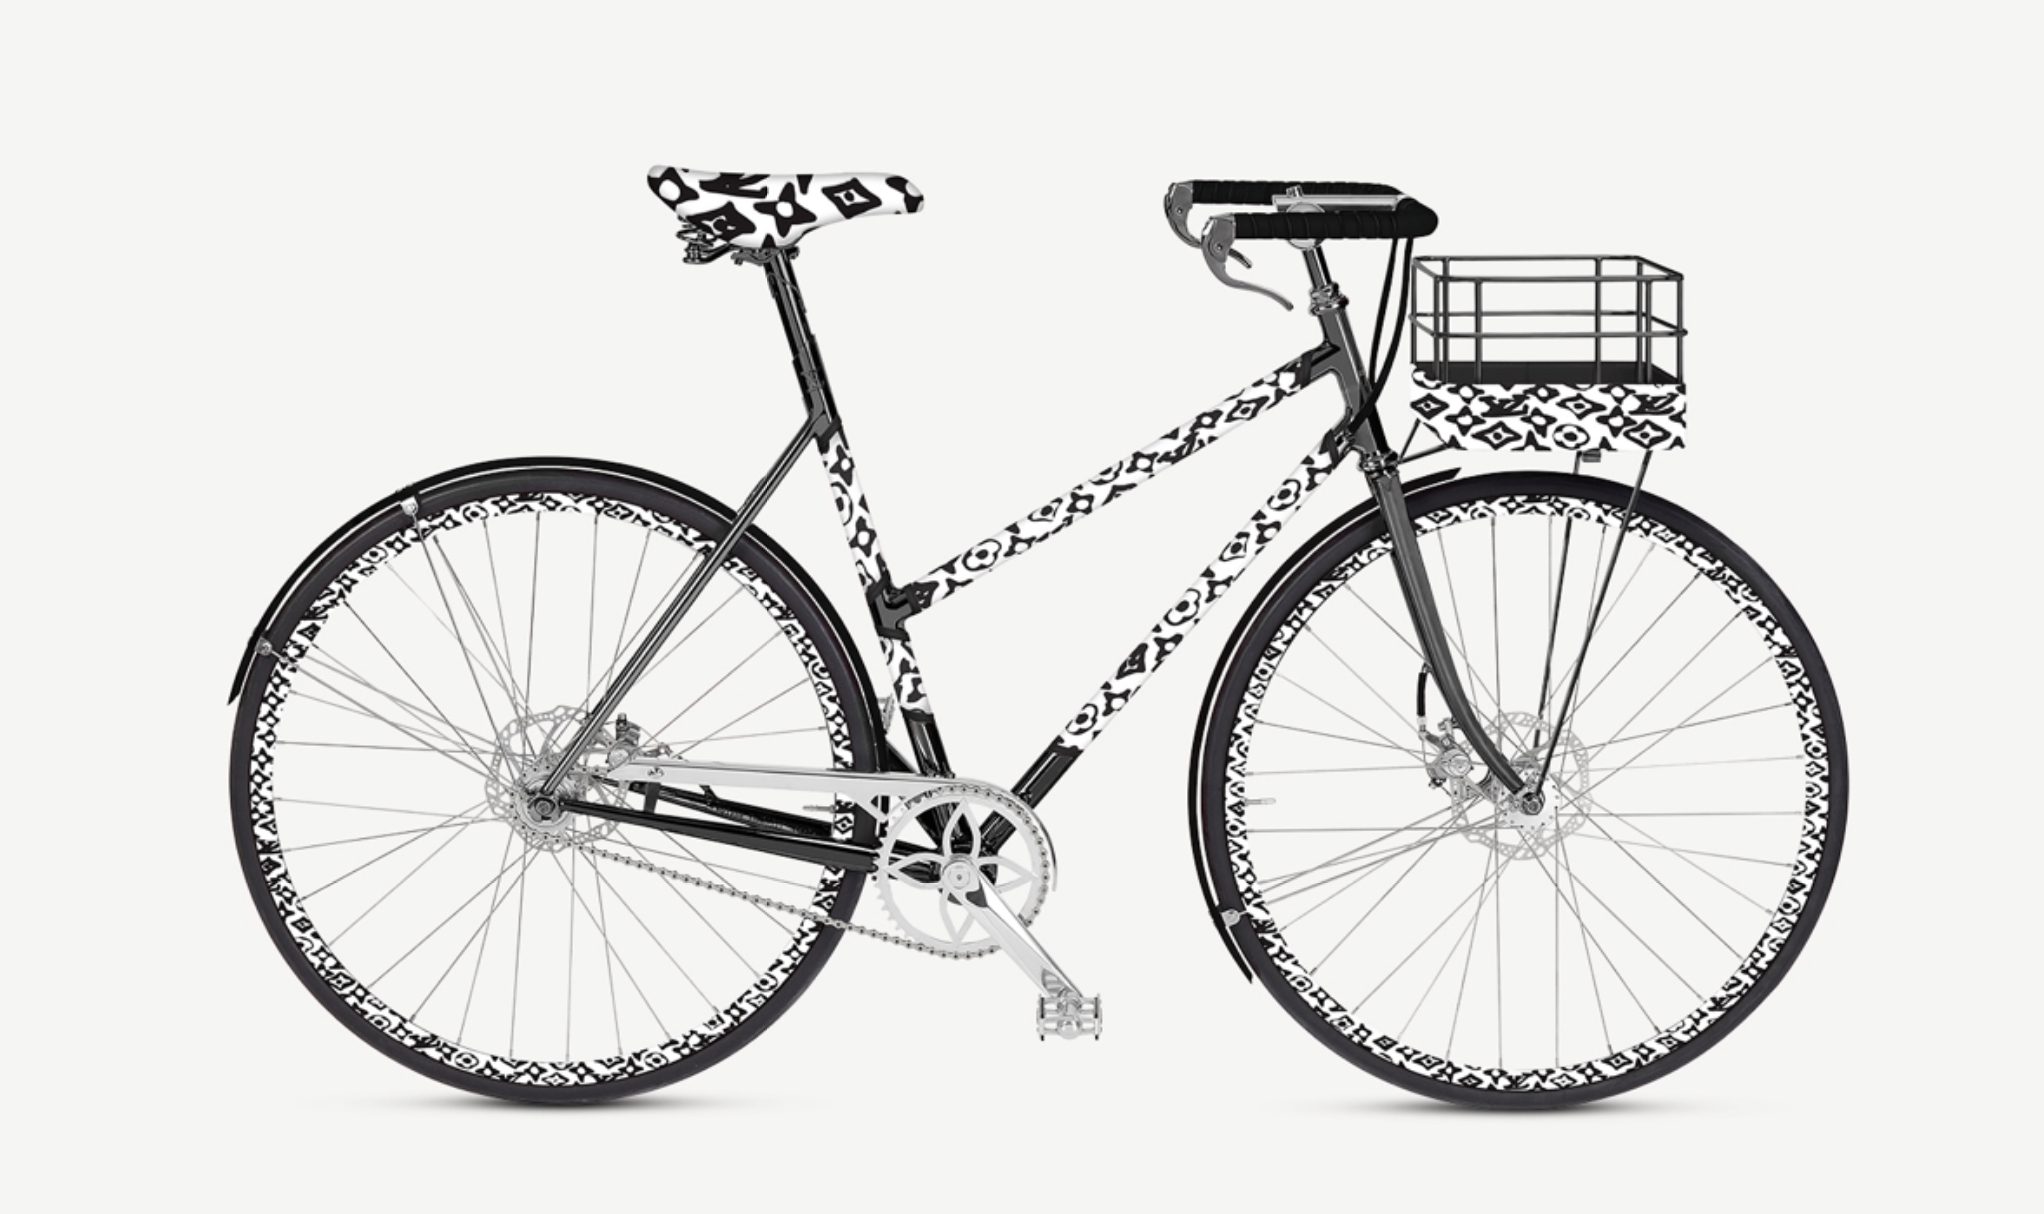 Louis Vuitton is selling a $35,000 bike - Canadian Cycling Magazine